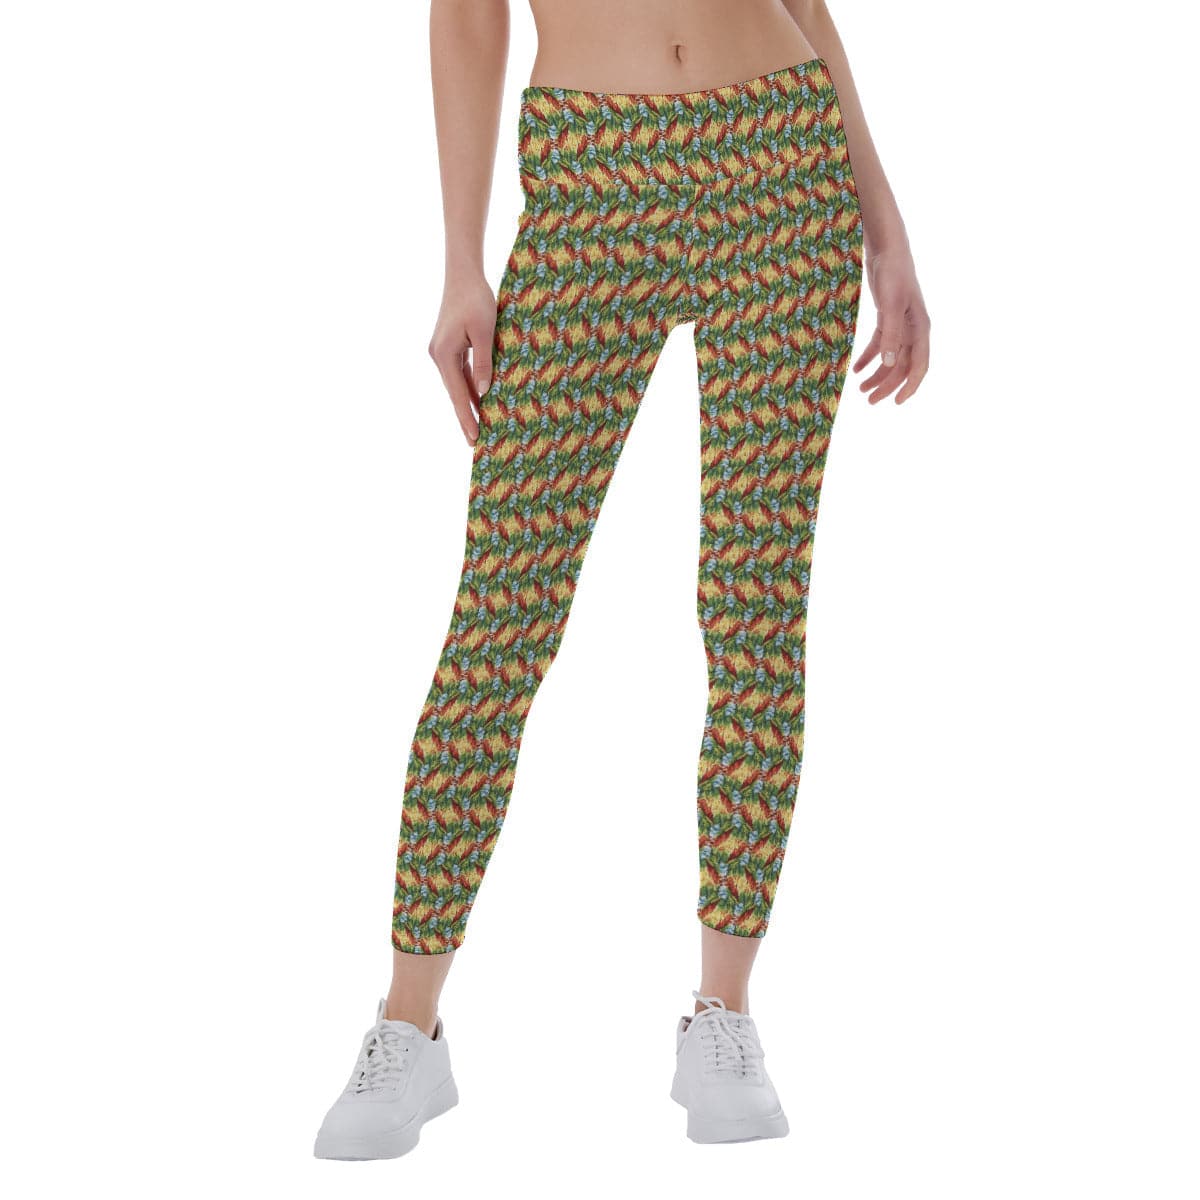 Red Yellow and Green patterned Women's Yoga Leggings, by Sensus Studio Design